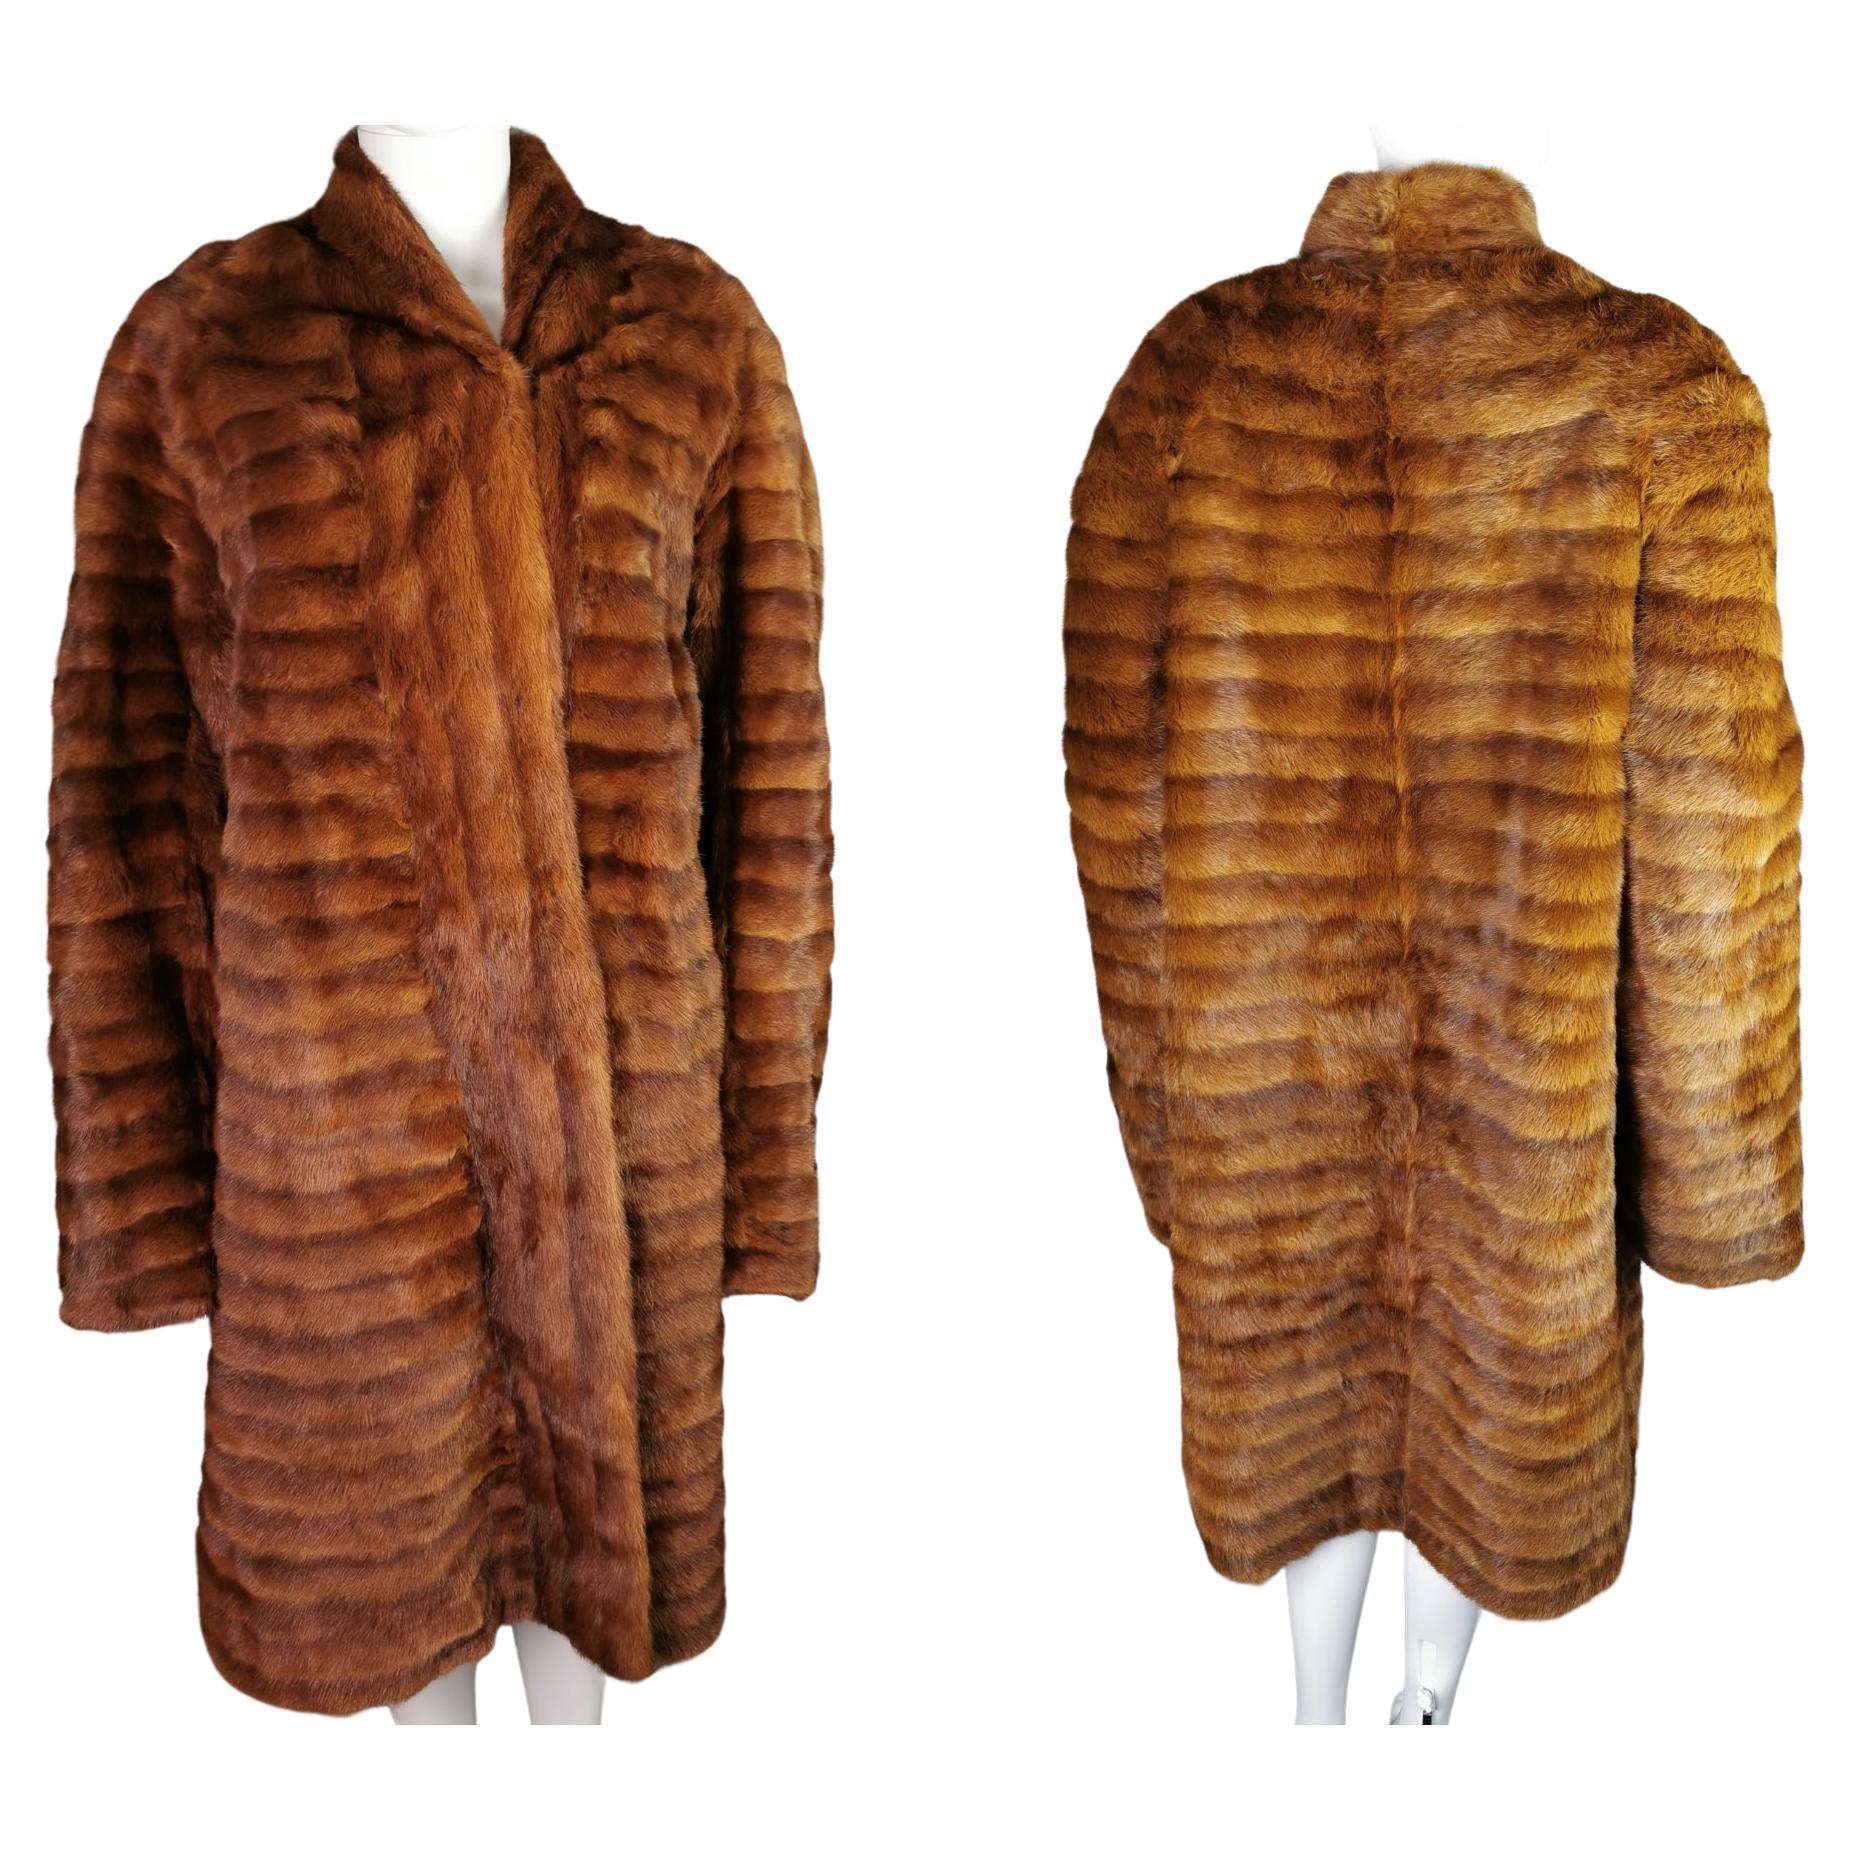 Are old fur coats worth anything?